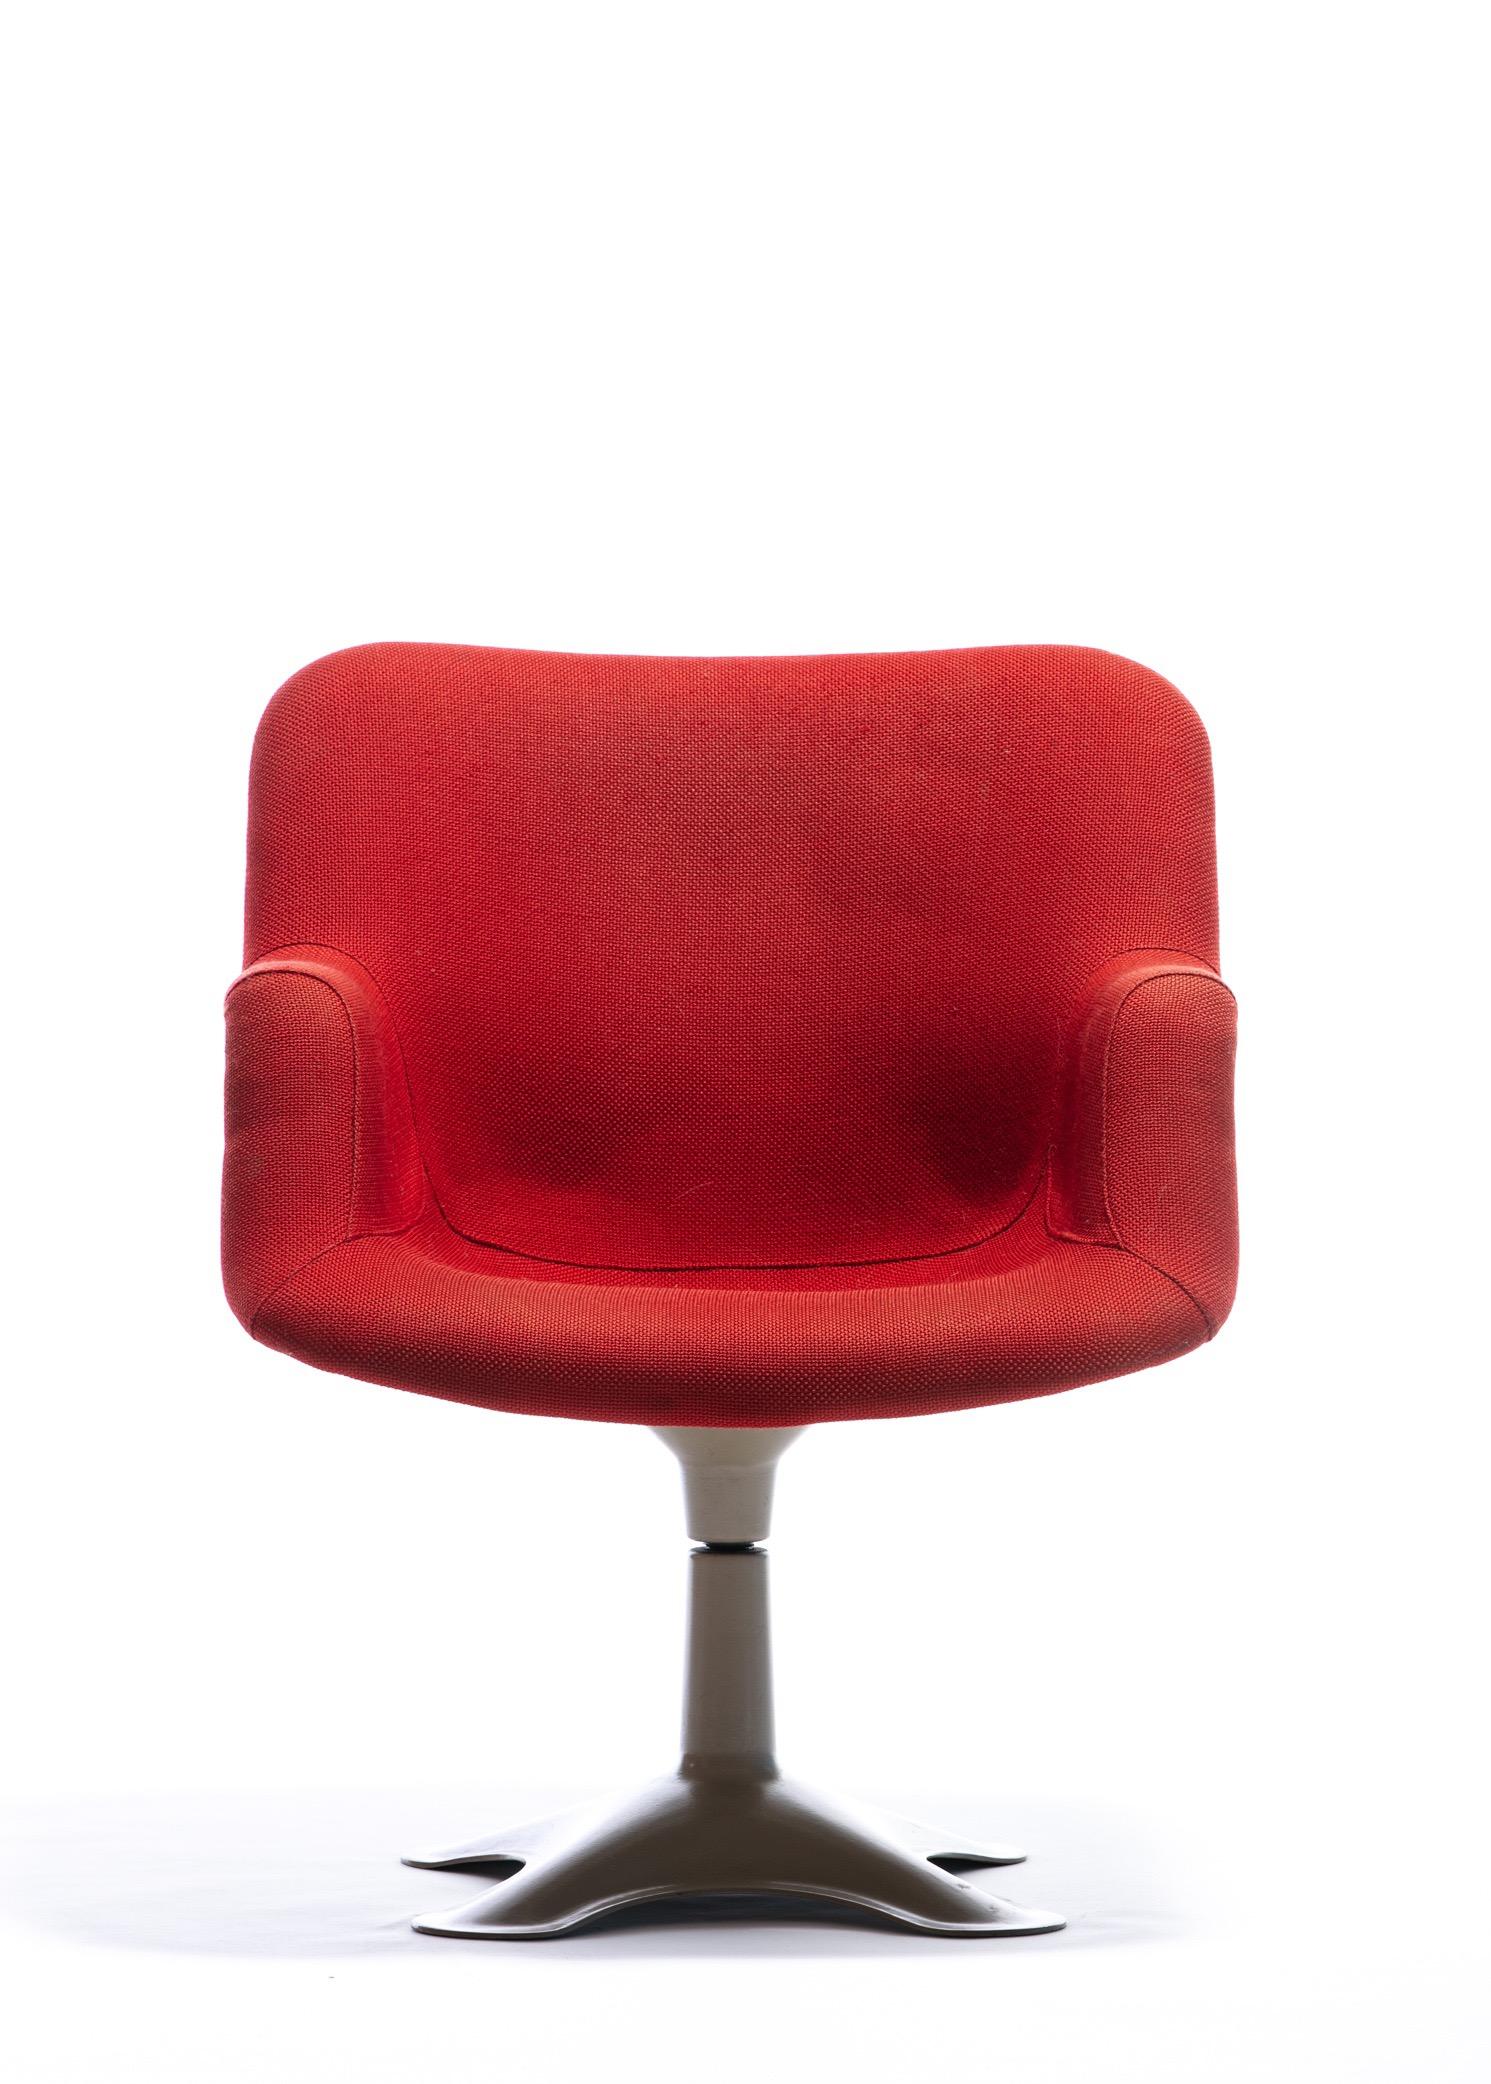 Yrjö Kukkapuro molded fiberglass swivel armchair in organic shape with red woven fabric. Fabric shows some moderate fading and age. Fabric is presentable but you will want to reupholster for it to be pristine. No chips to fiberglass, but some scuffs